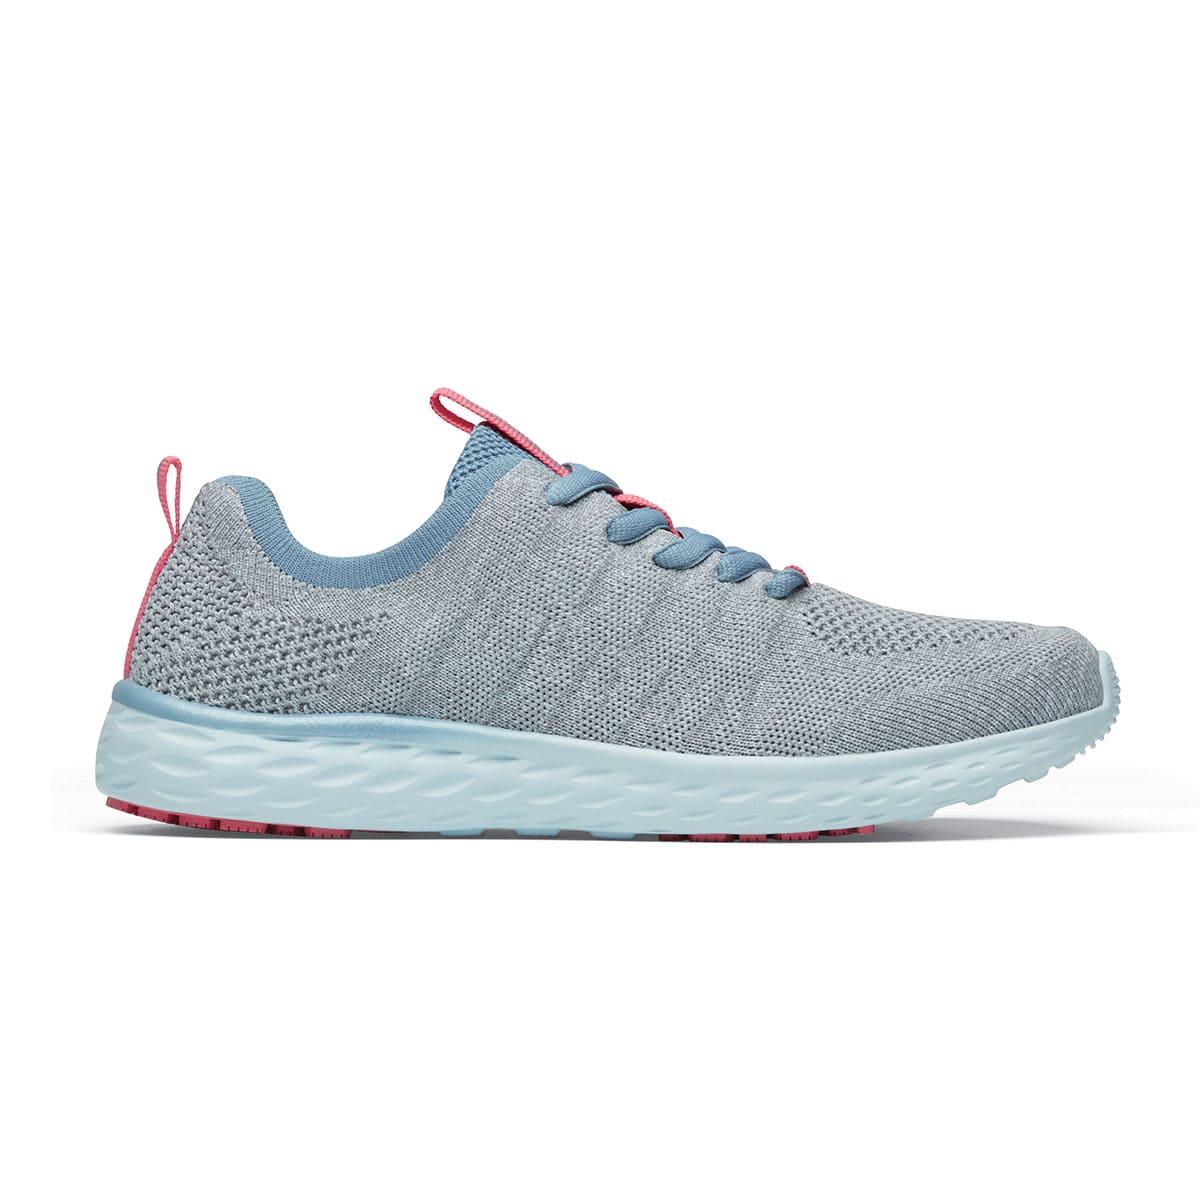 The Everlight Womens Gray/Blue/Coral from Shoes For Crews are slip-resistant trainers constructed with a breathable, water-resistant mesh upper,  seen from the right.